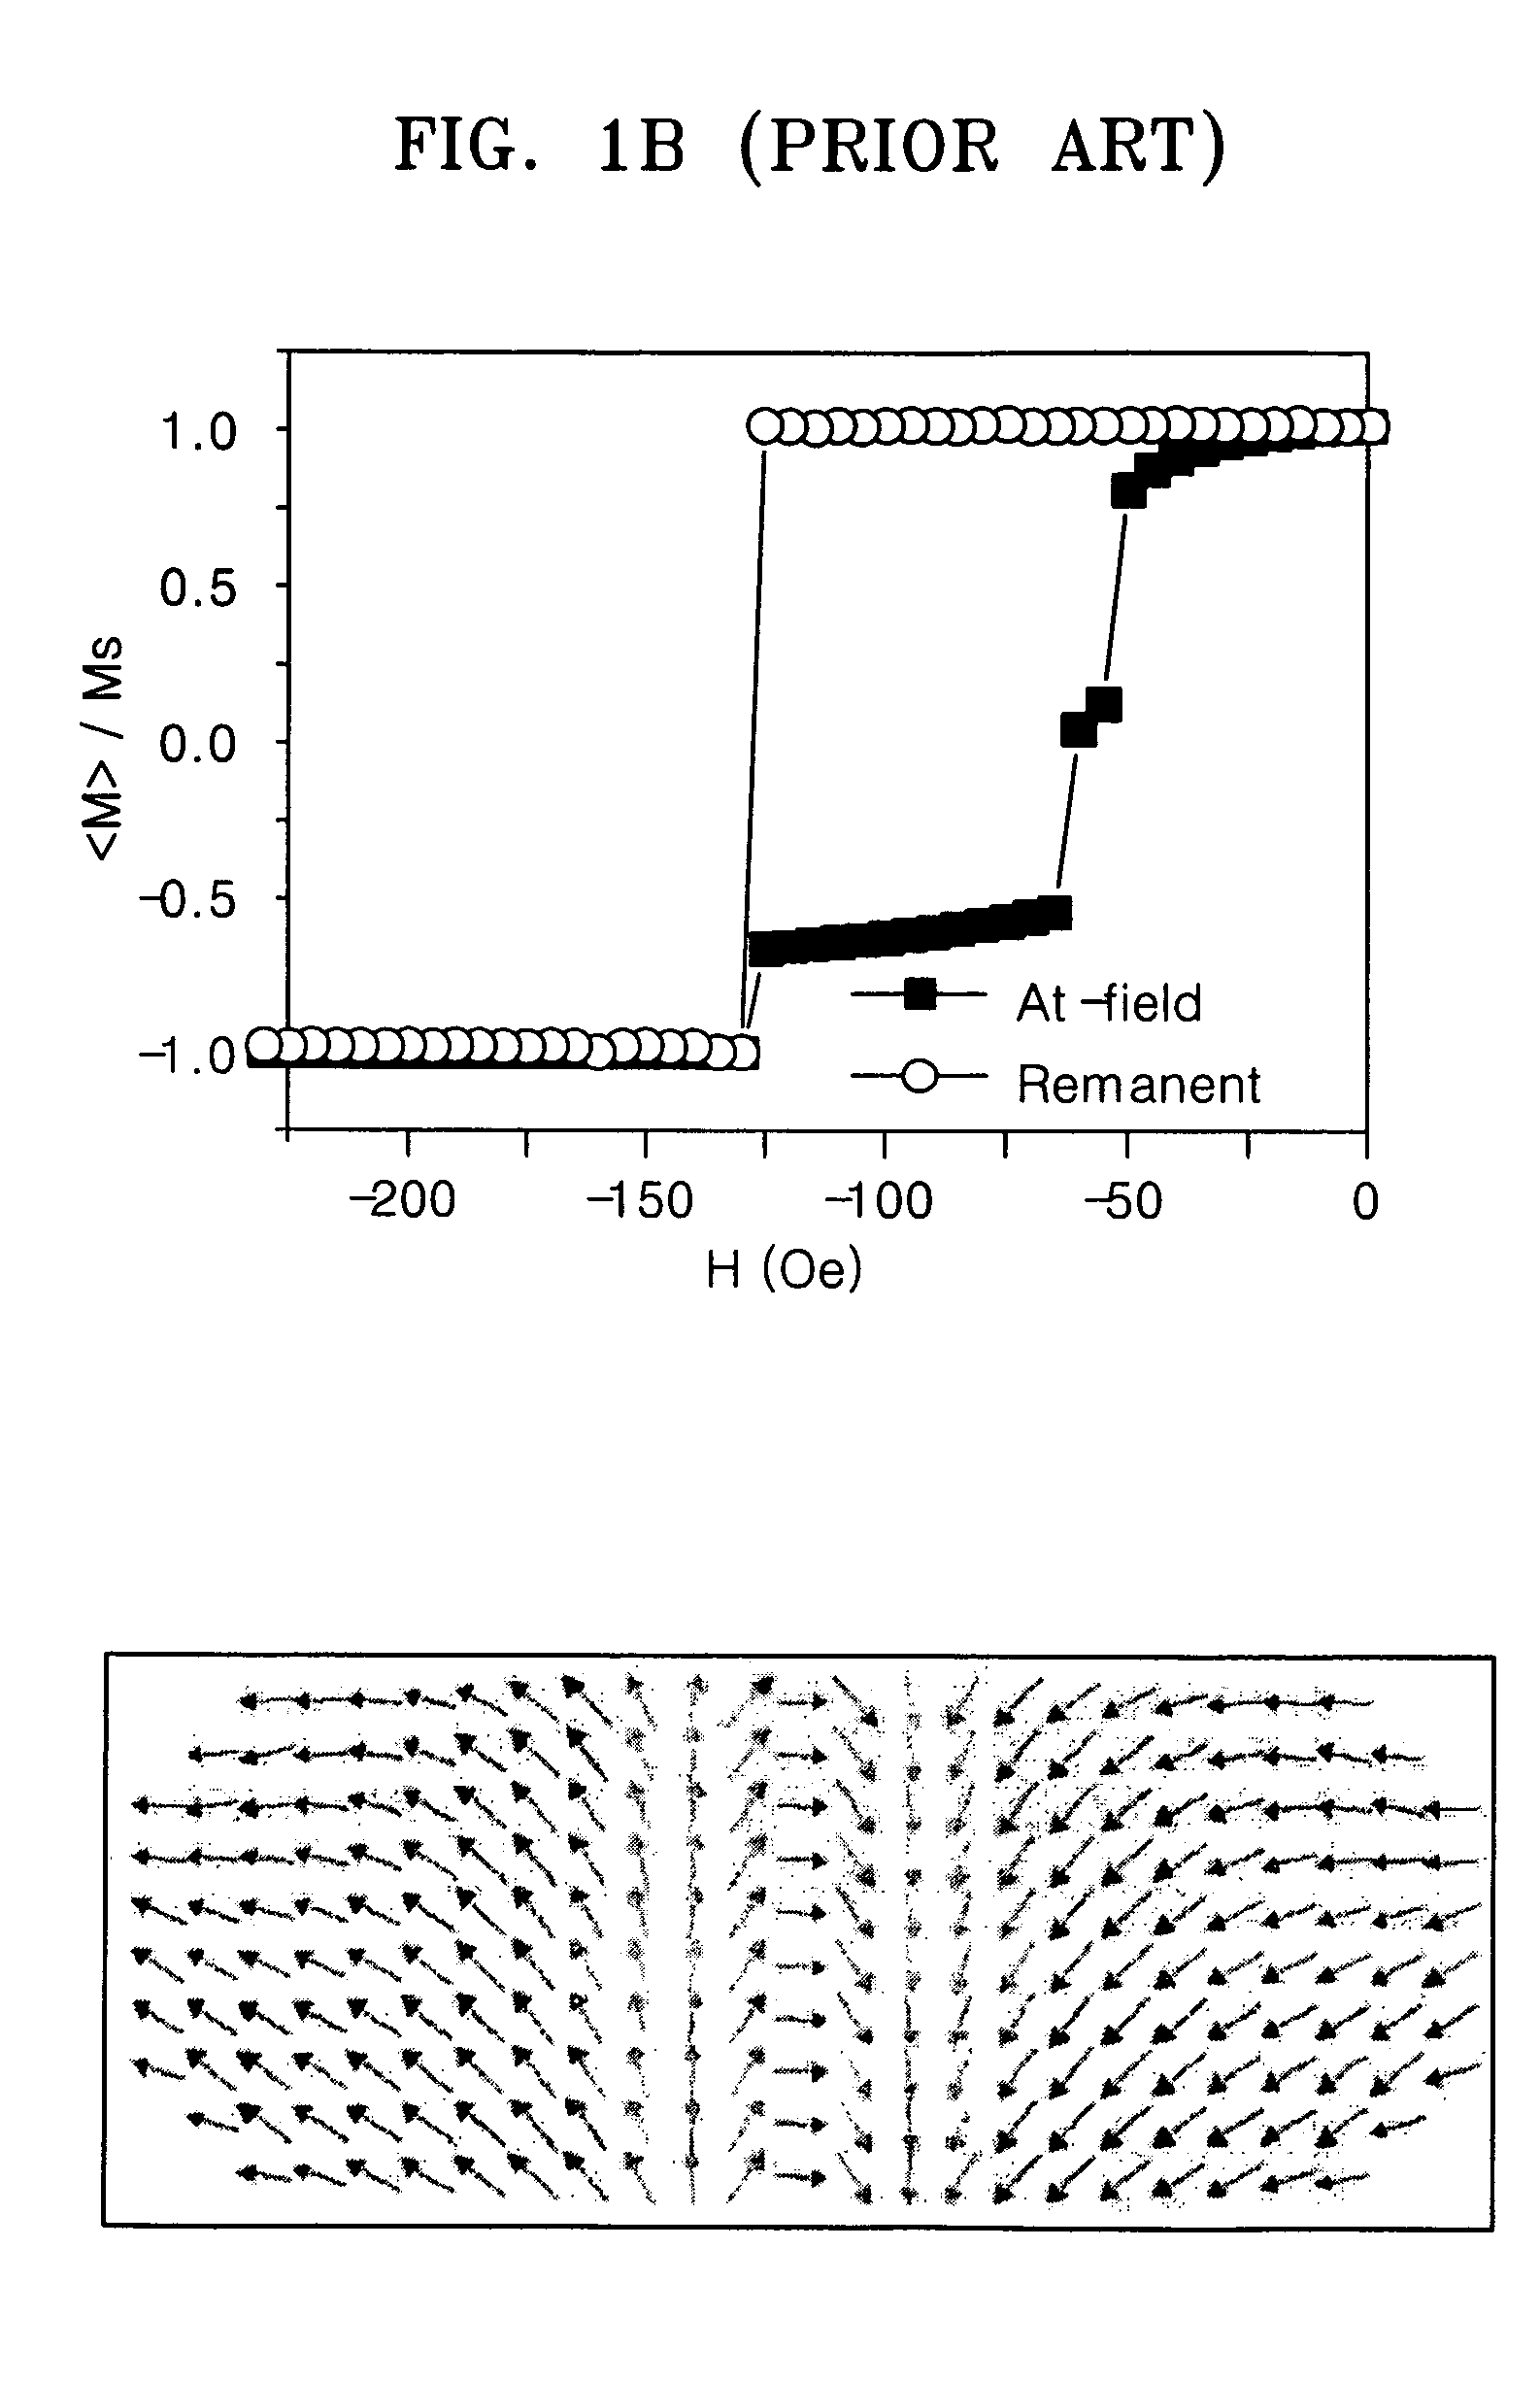 Apparatus and method of analyzing a magnetic random access memory